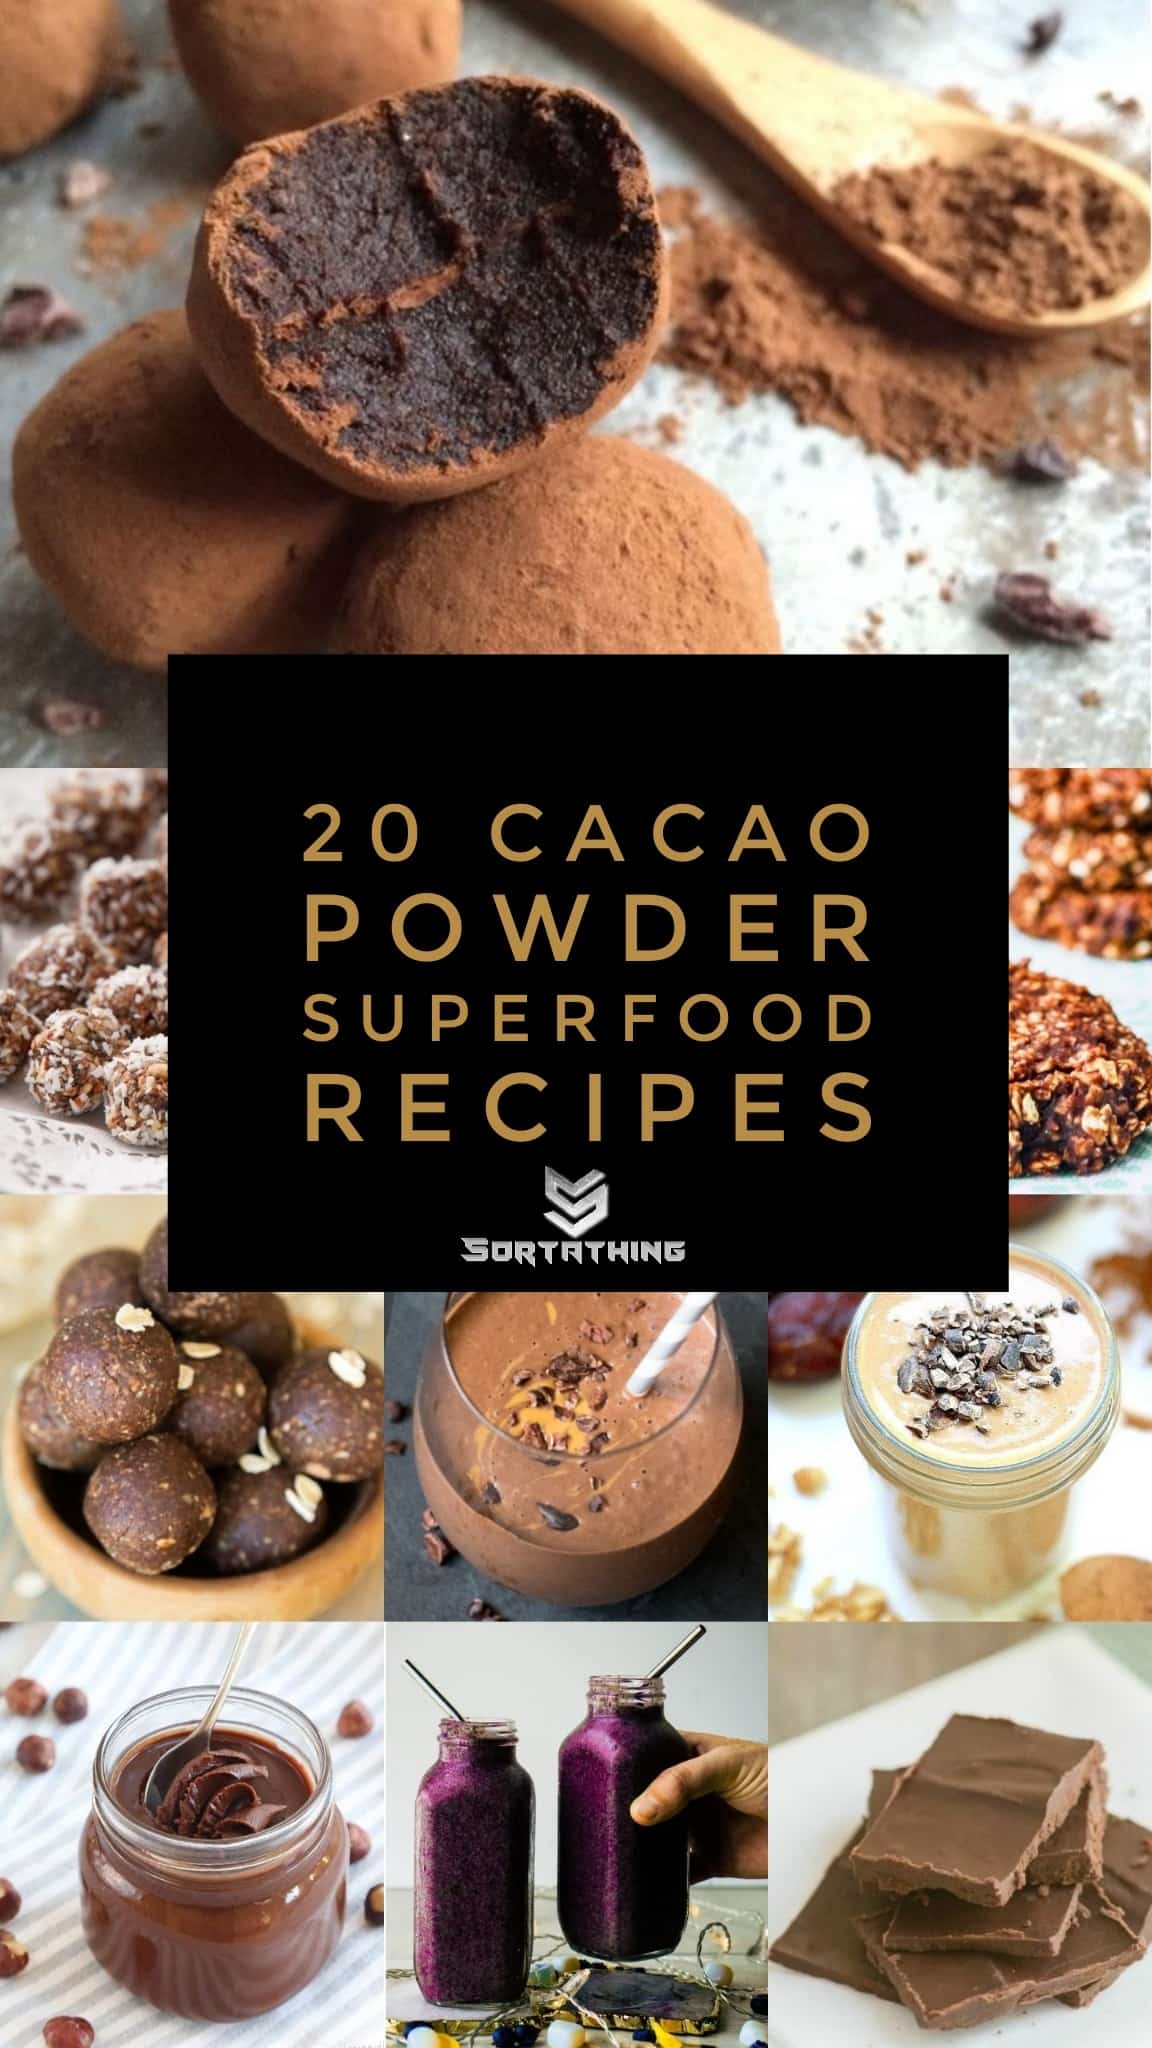 20 Cacao Powder Superfood Recipes from Sortathing Health